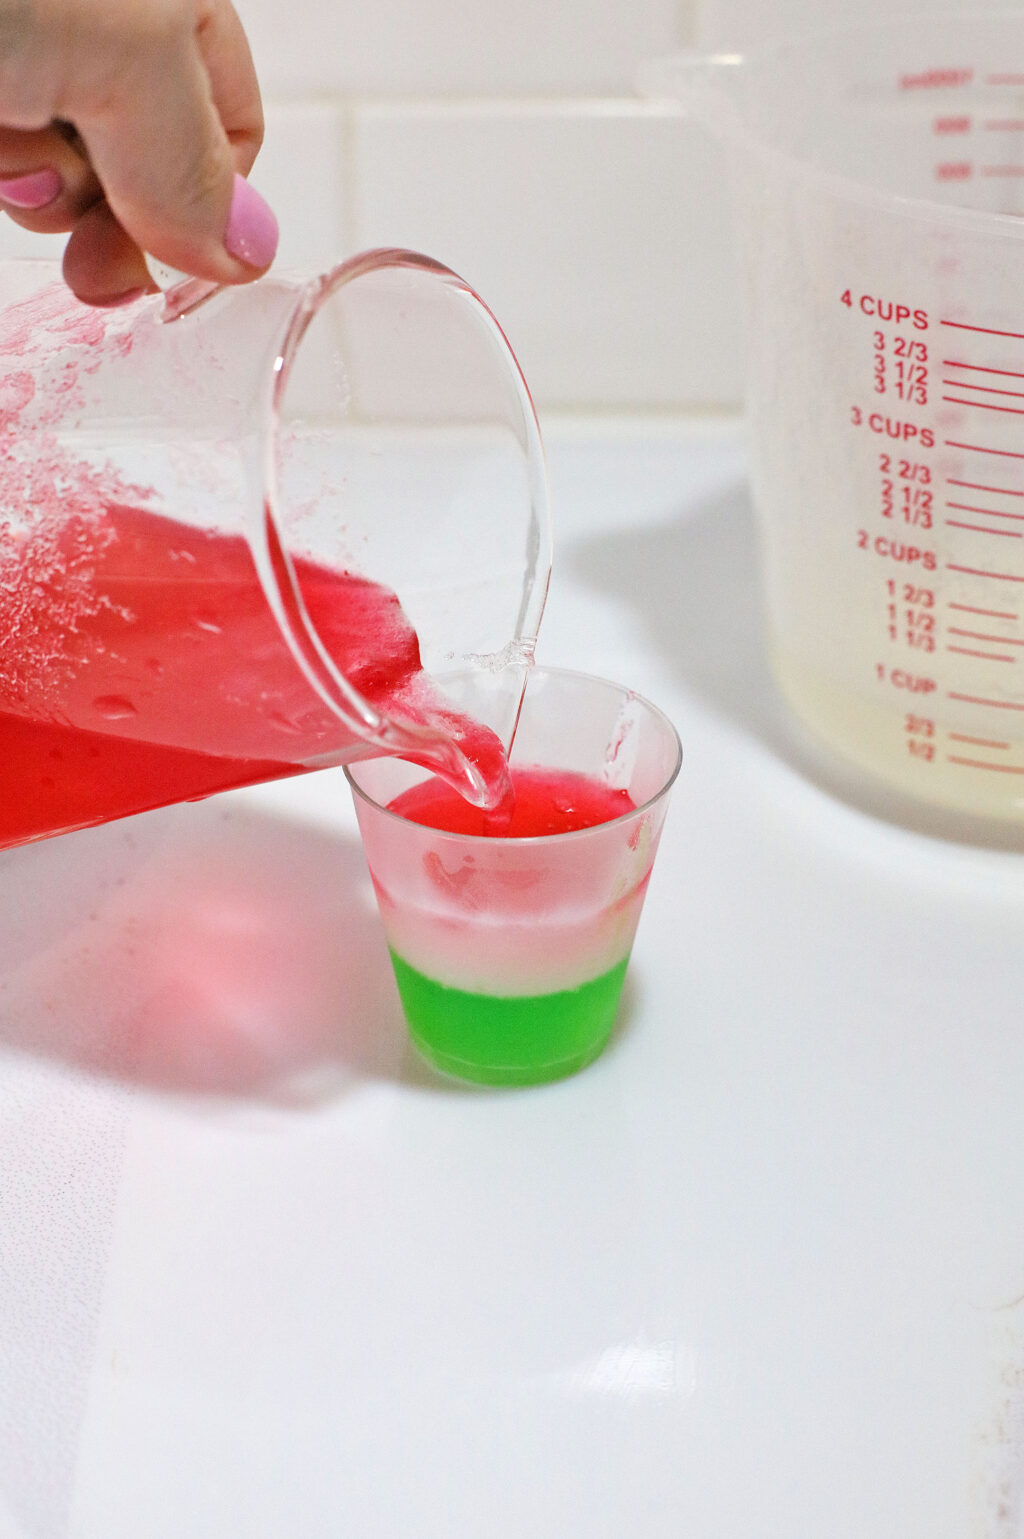 pink gelatin mixture being poured into shot glass